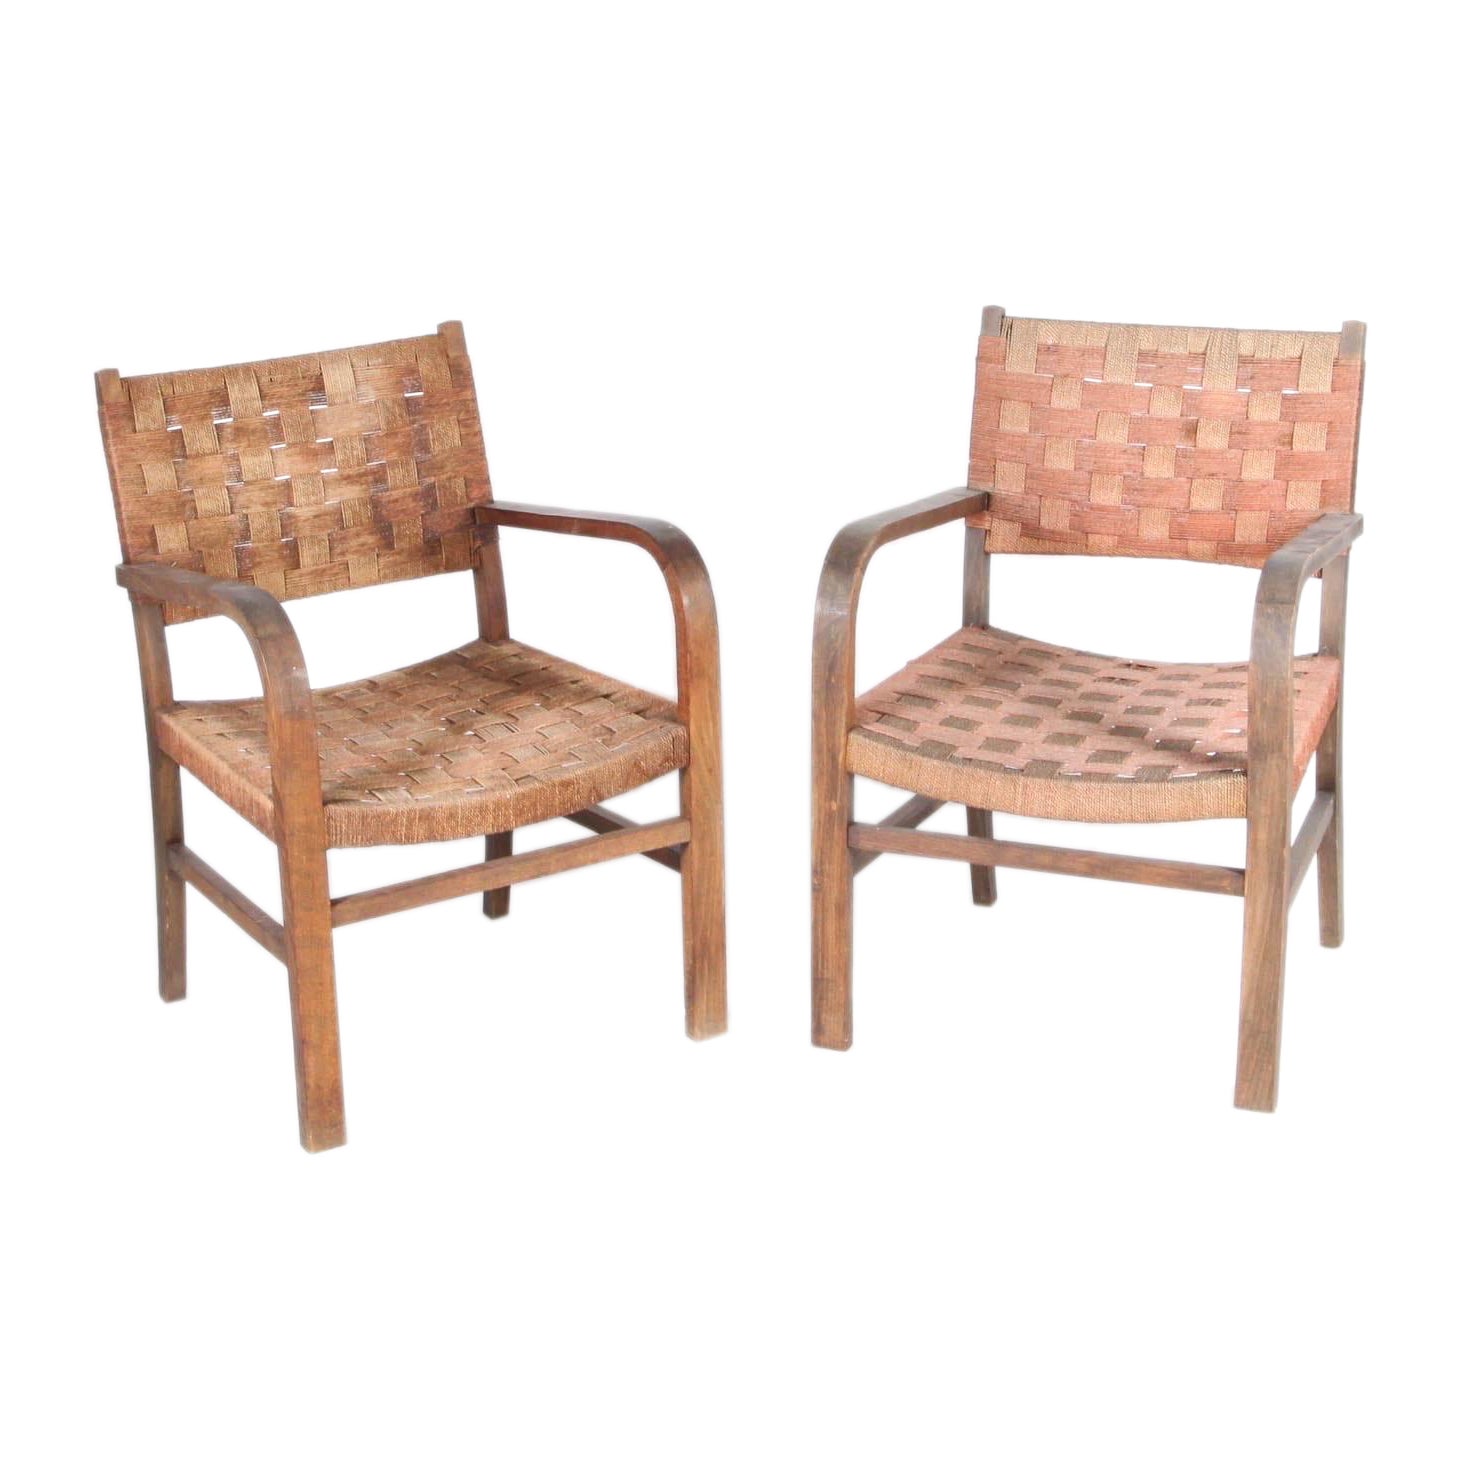 Pair of rope and beech wood armchairs circa 1960